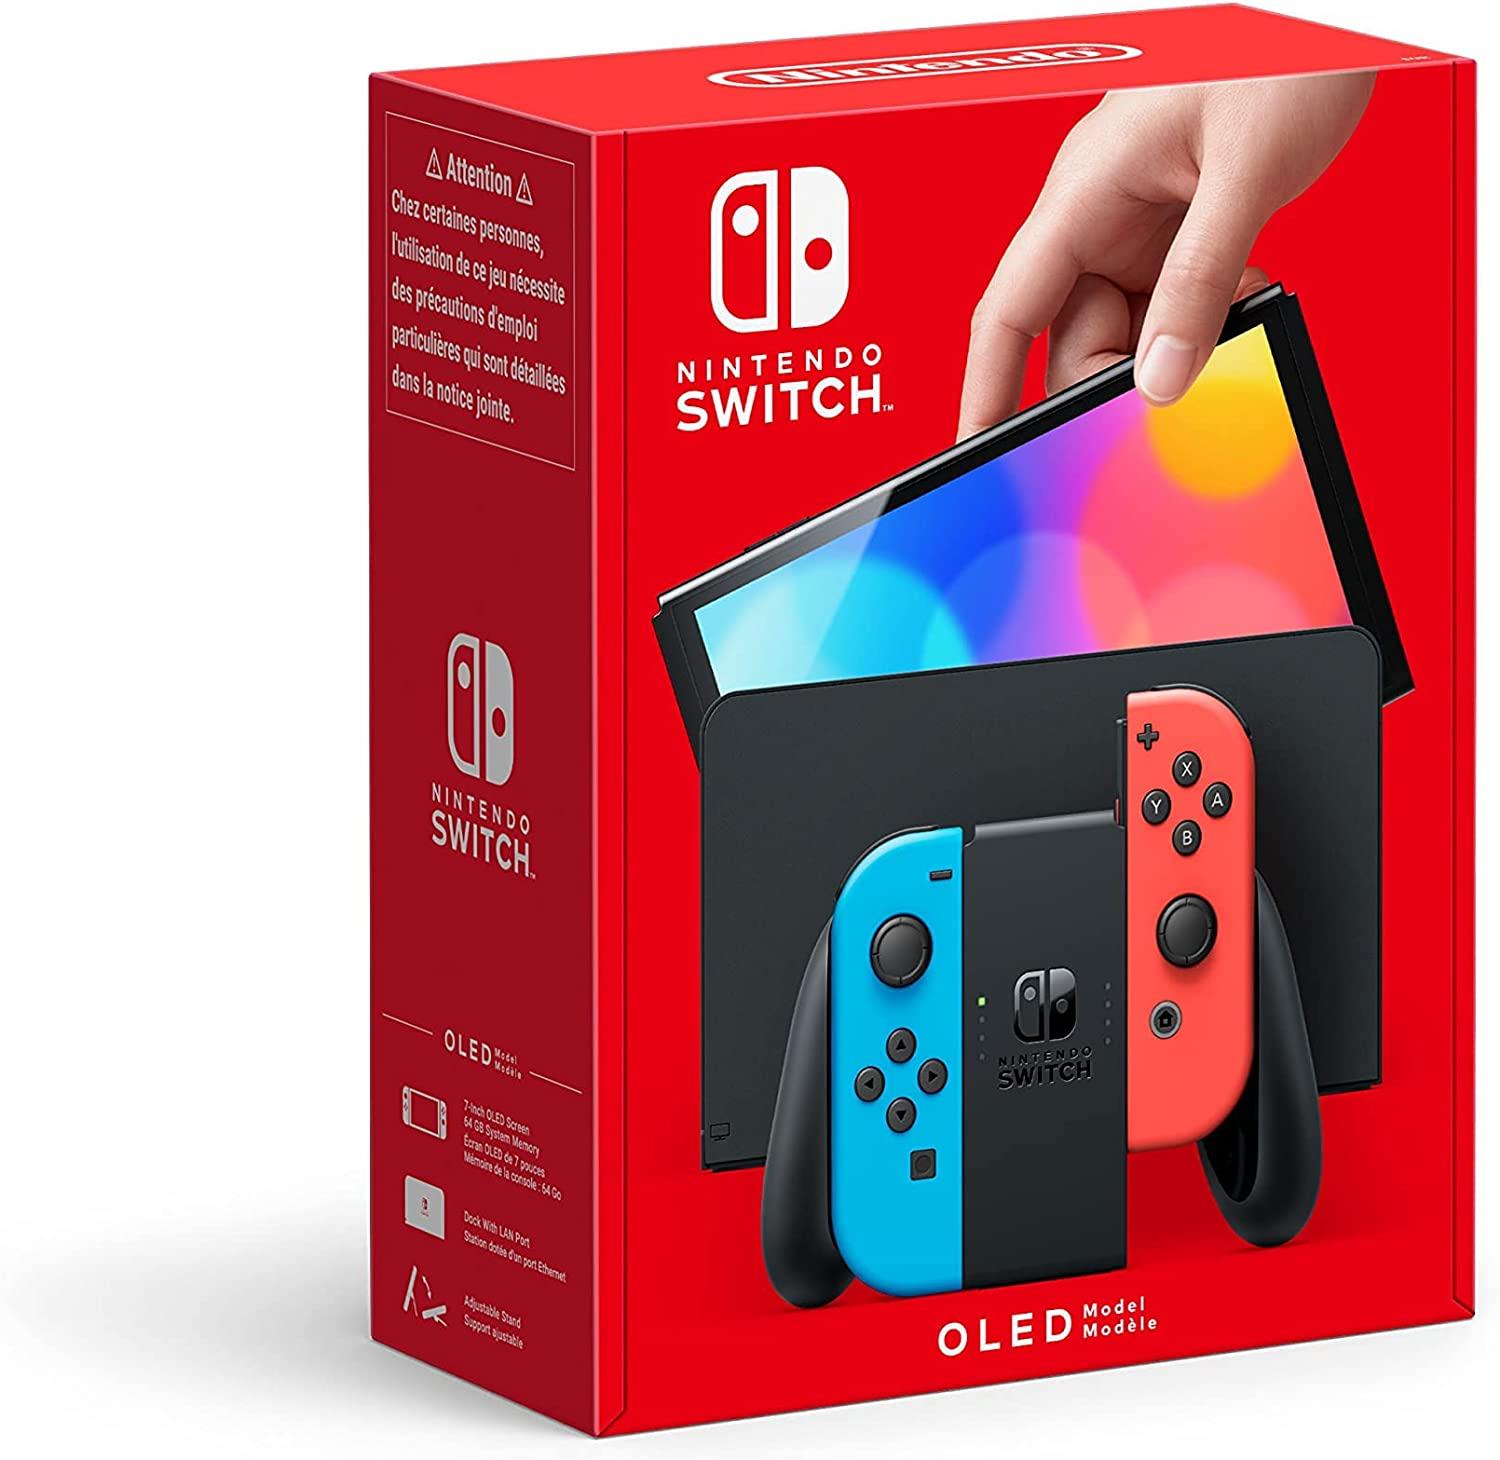 Nintendo Switch OLED Model Console - Neon Blue & Neon Red